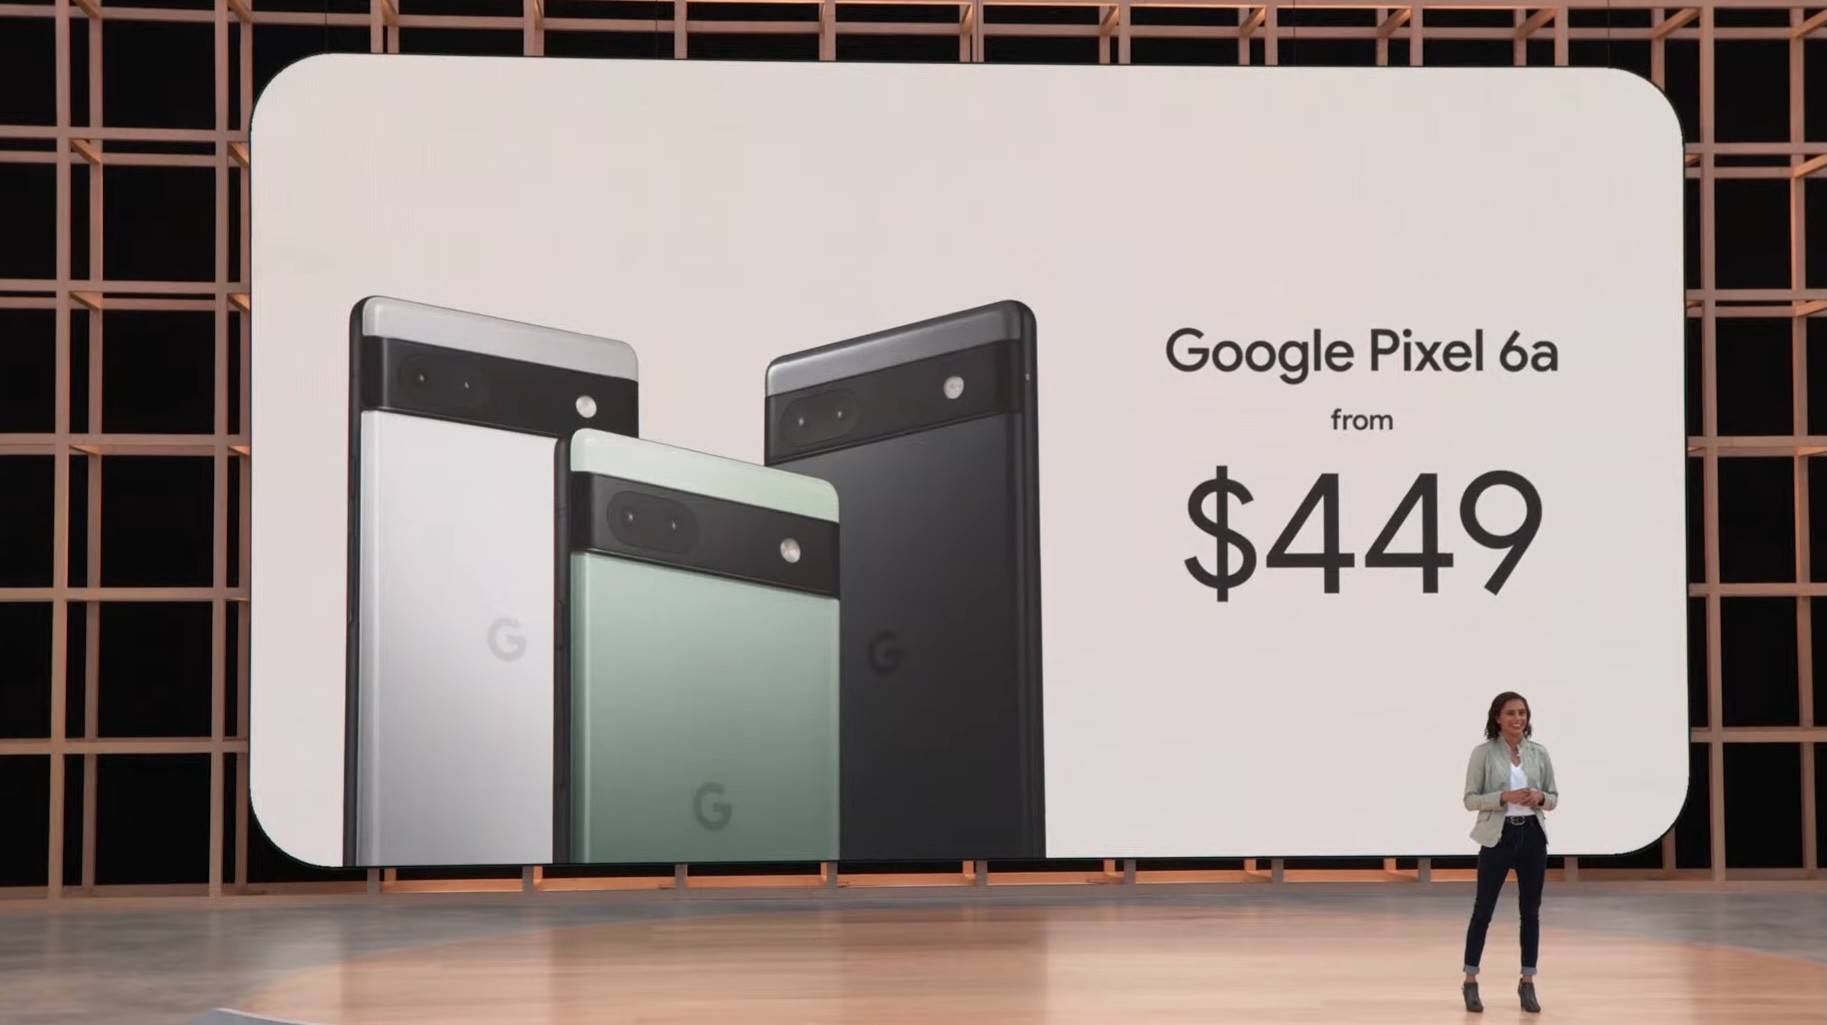 Pixel 6a price availability